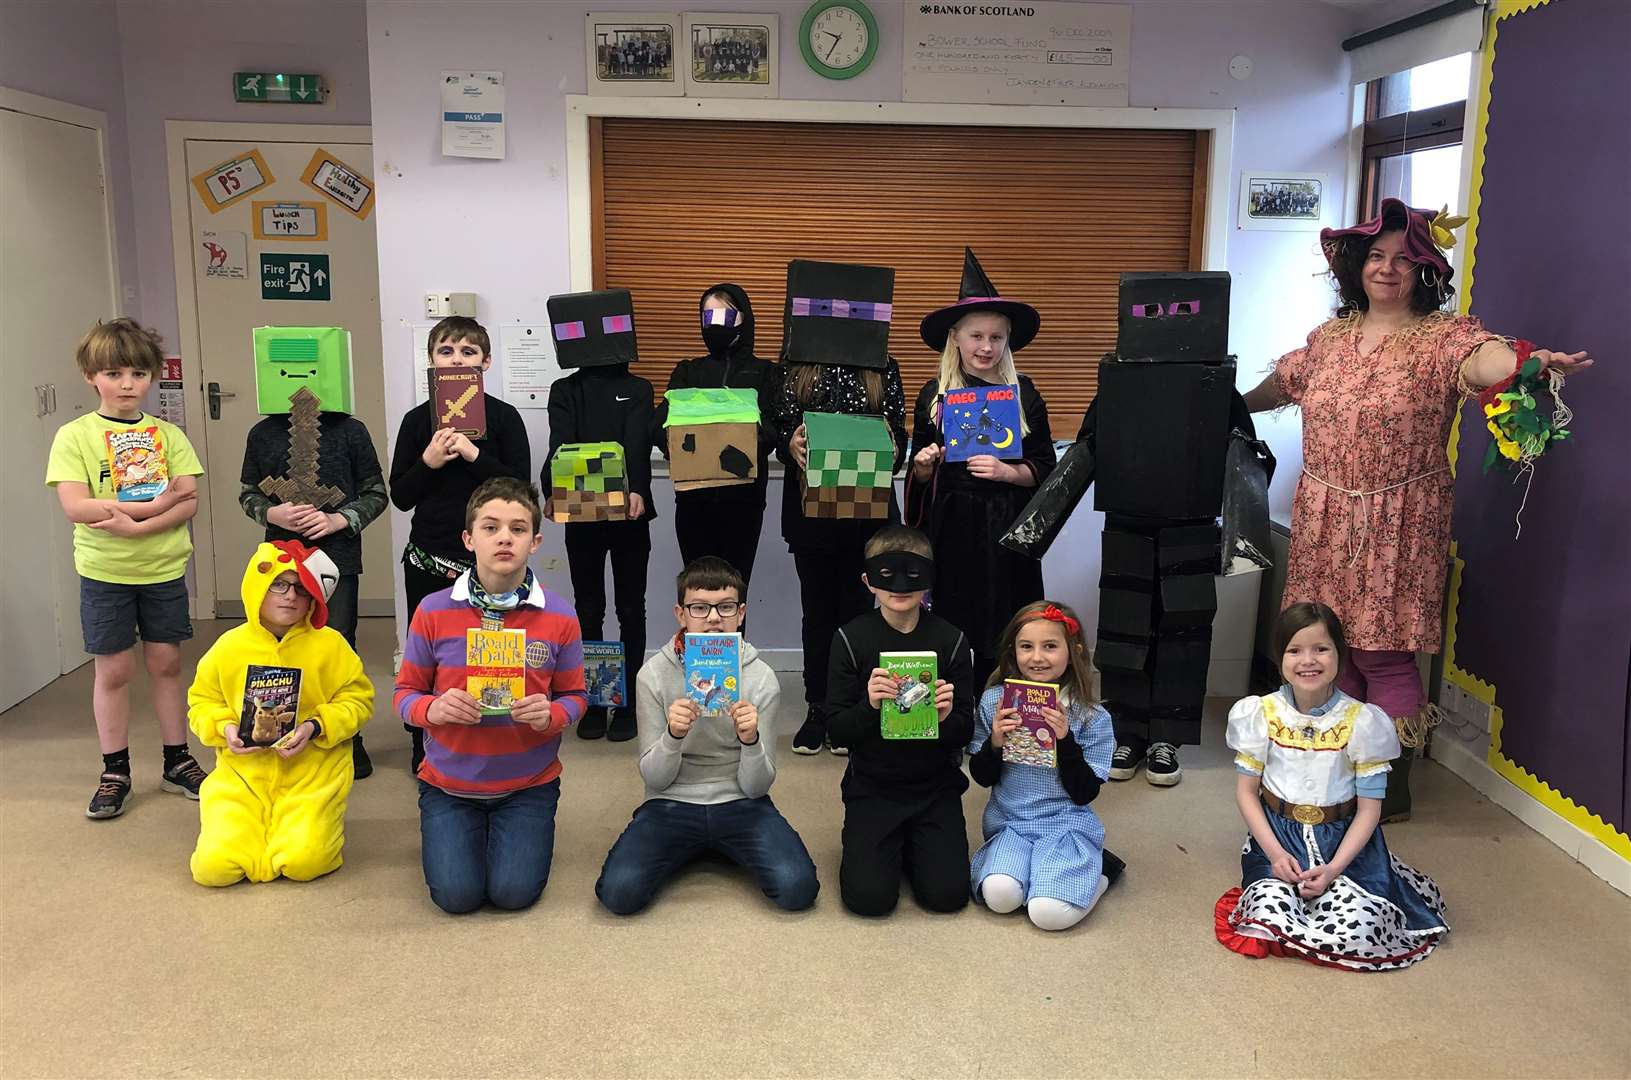 A group of Bower Primary School children in their World Book Day costumes.